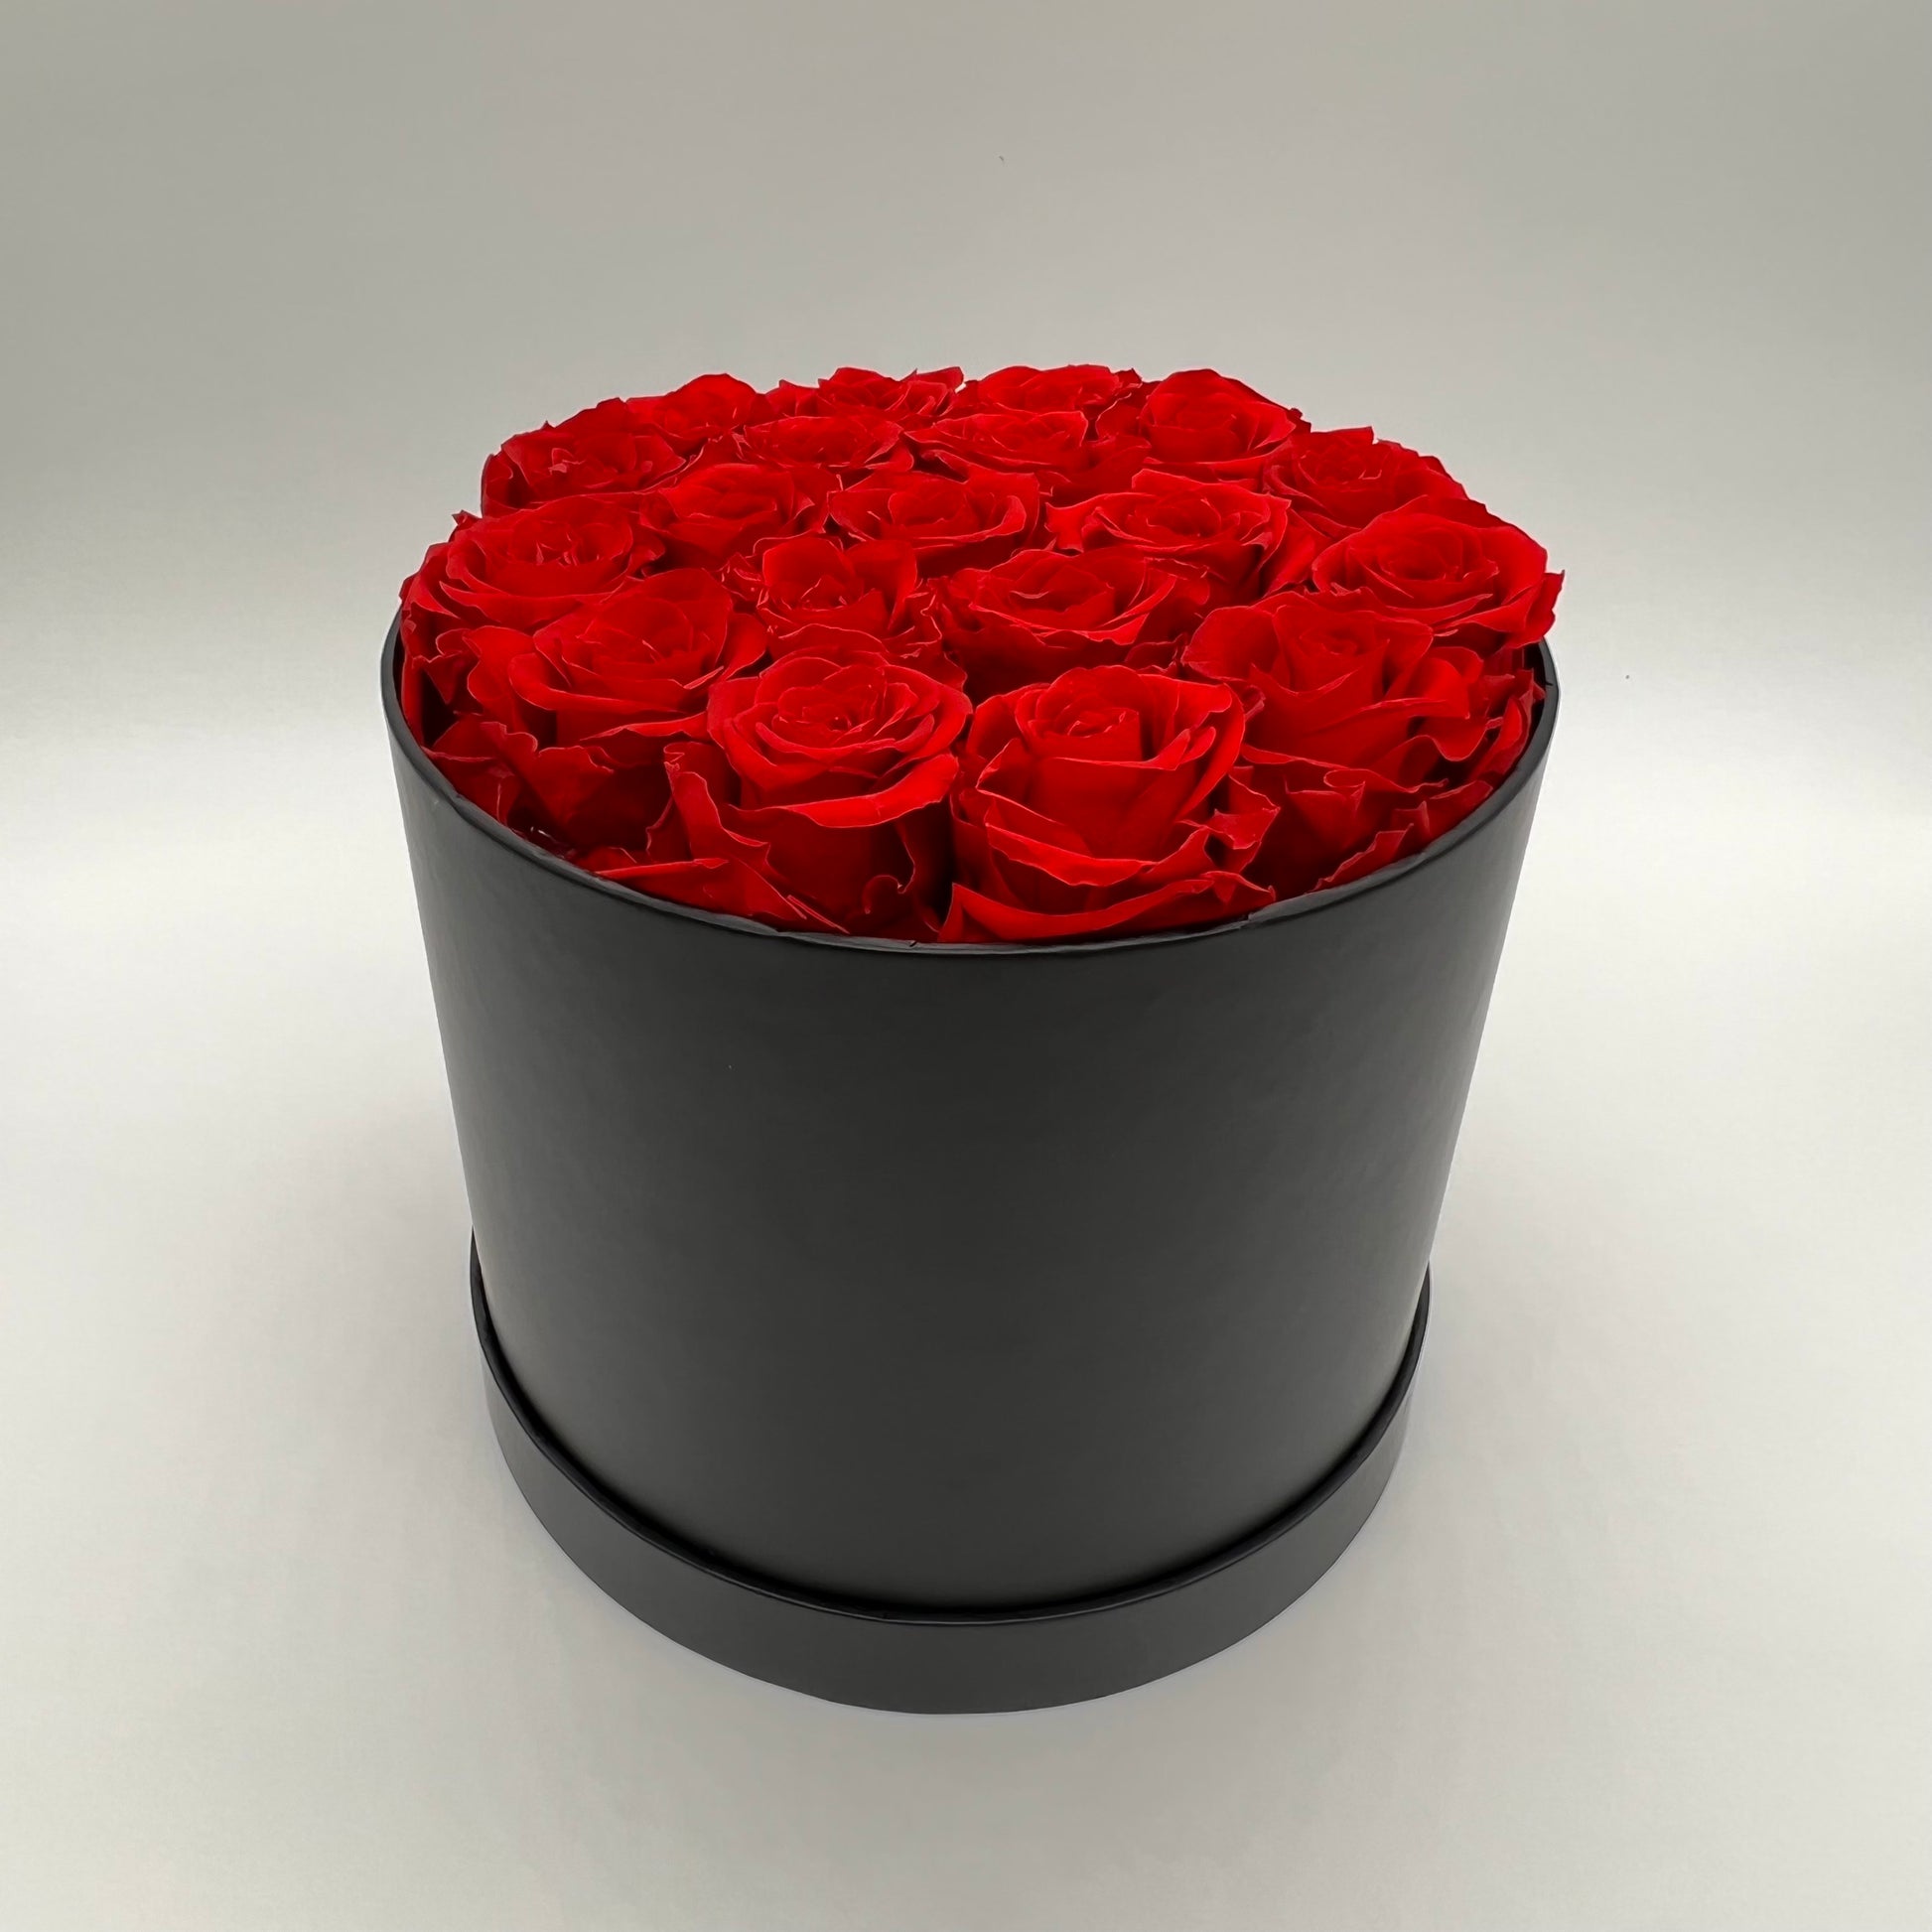 19 Red Roses in Beautiful Round Box – Ethereal Rose